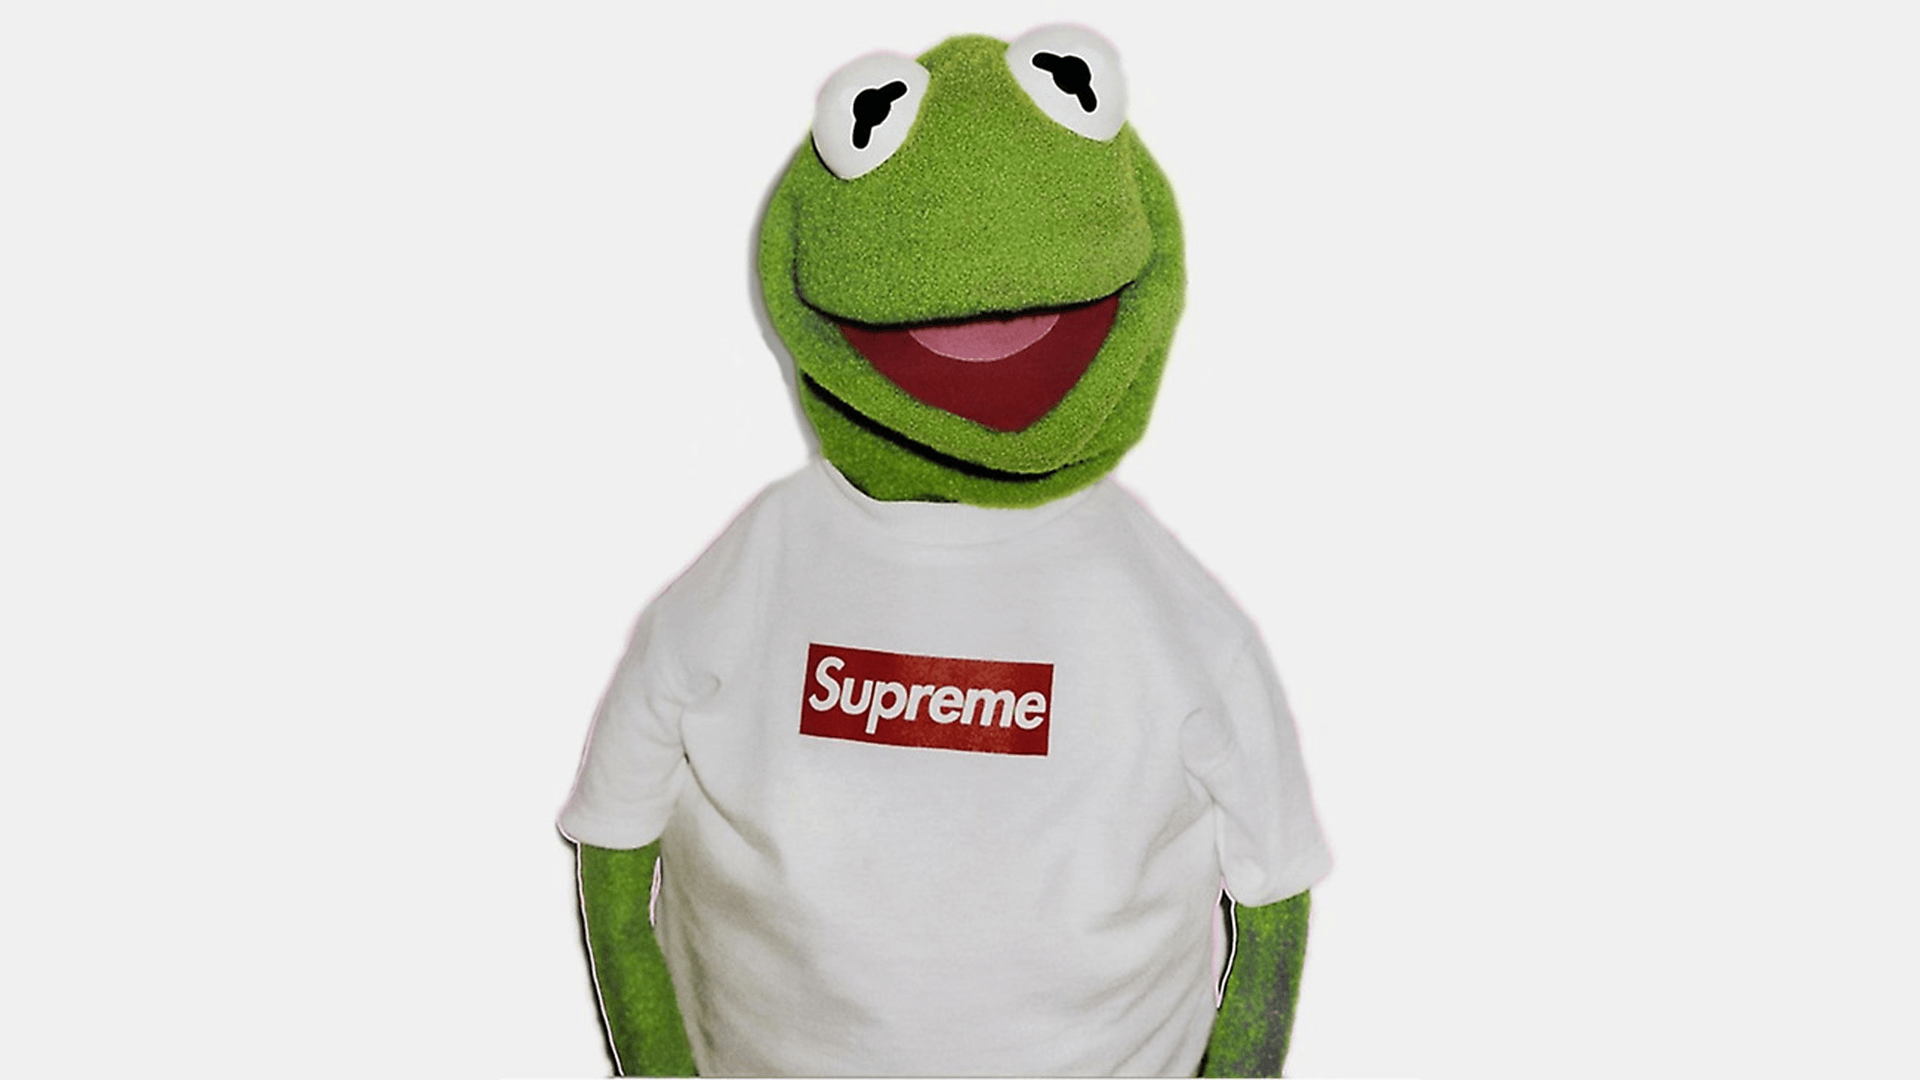 Kermit Supreme Wallpaper (1920x1080), Couldnt find one so made one